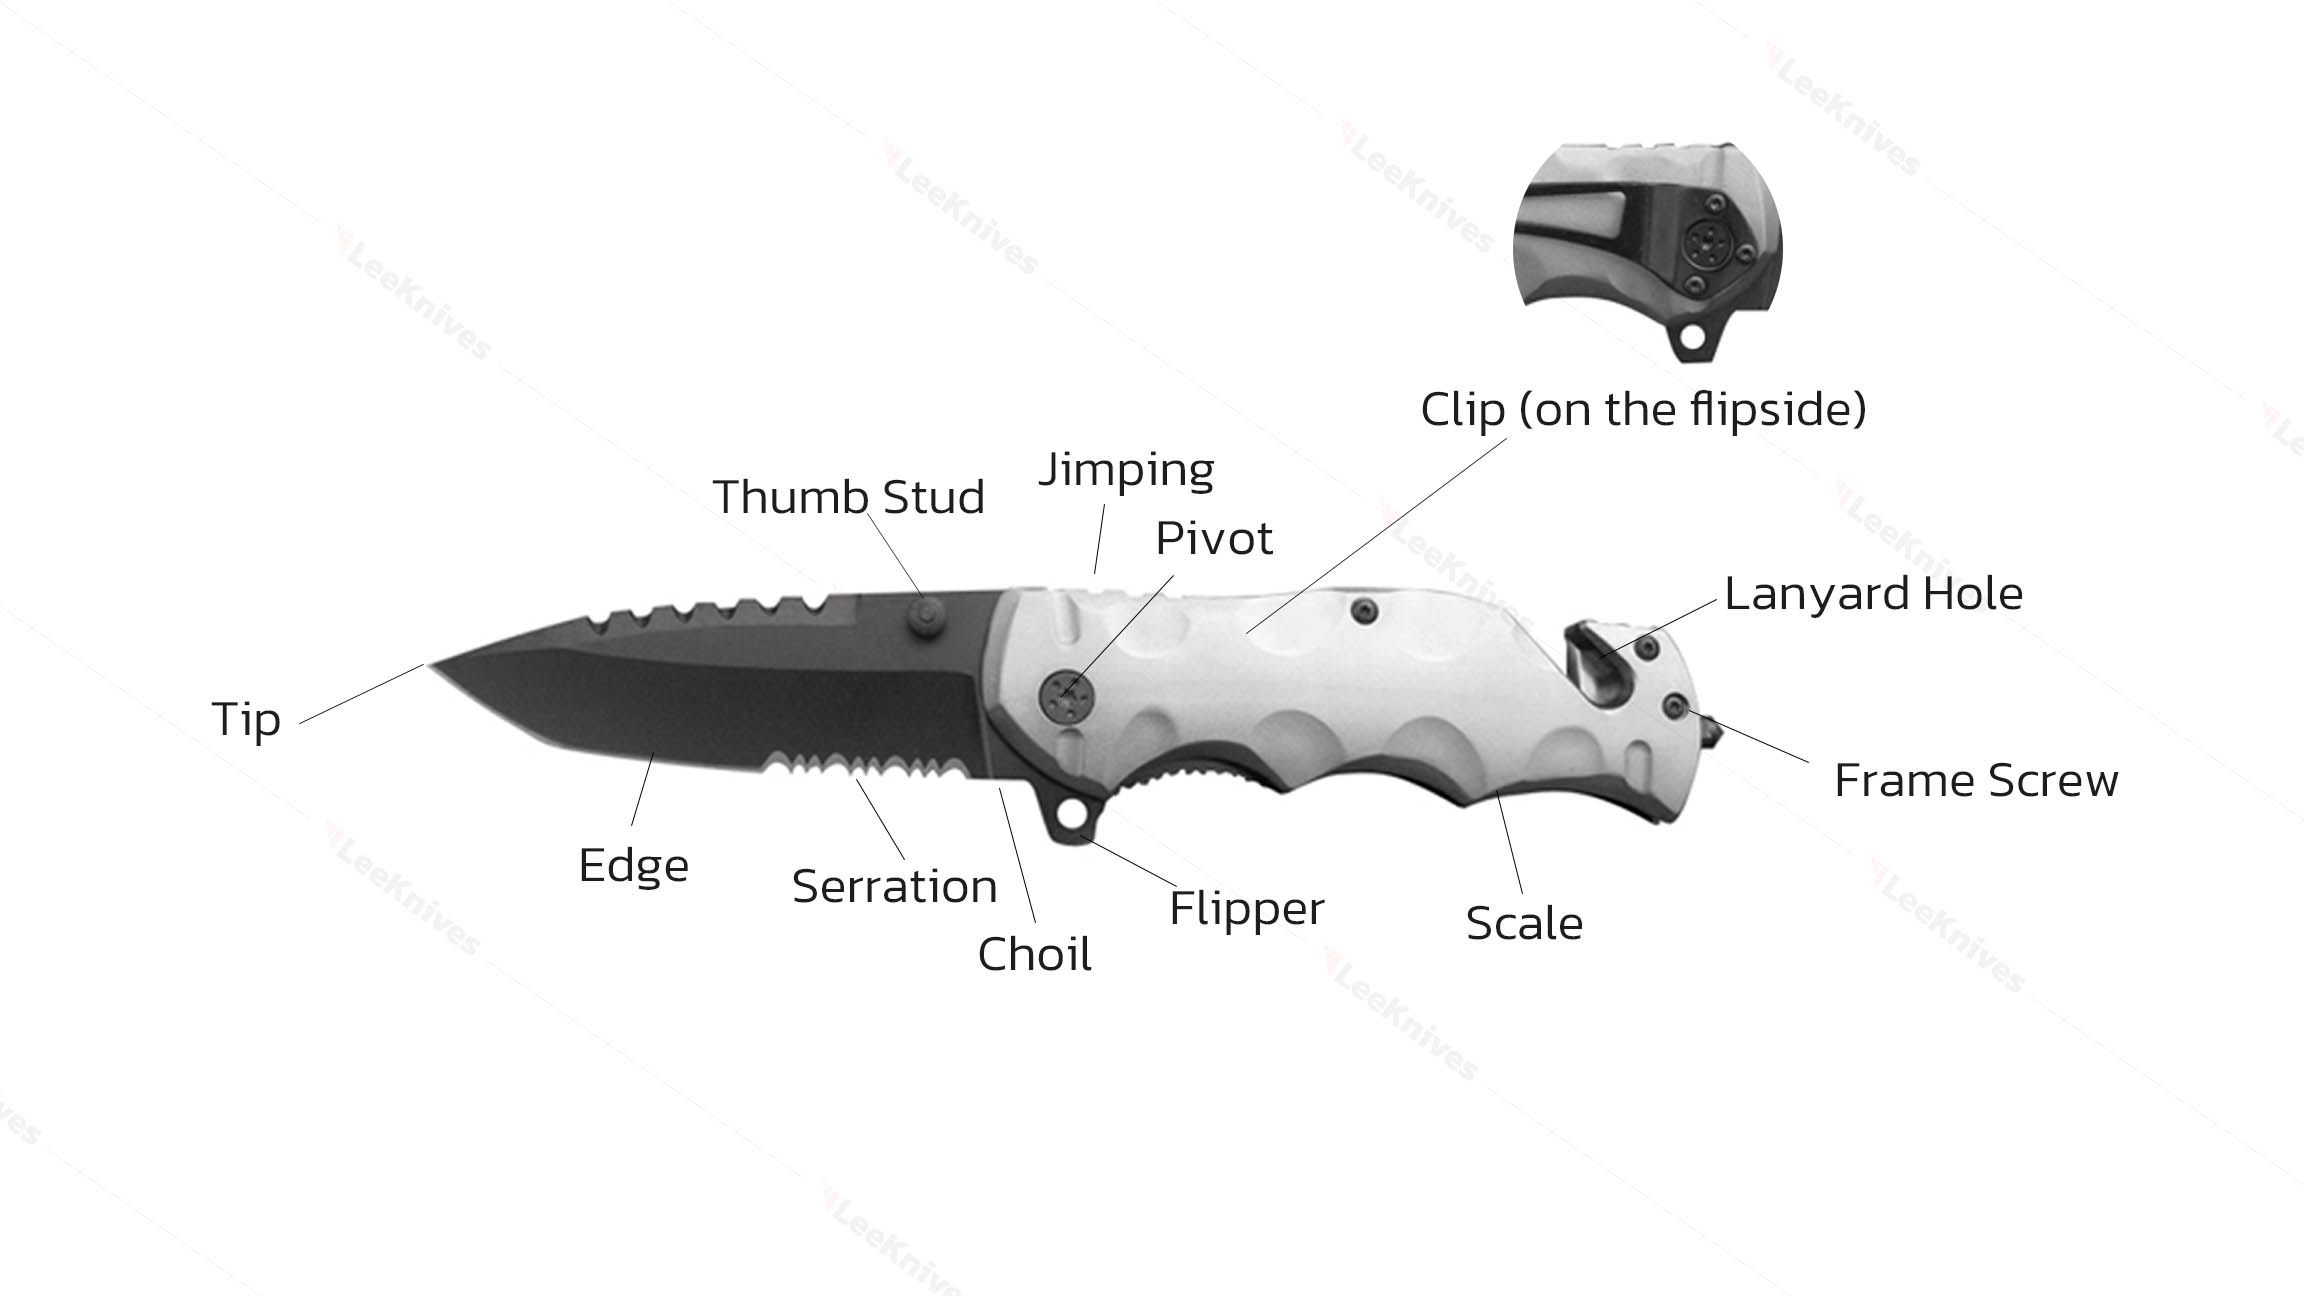 The Different Parts of a Folding Pocket Knife Explained